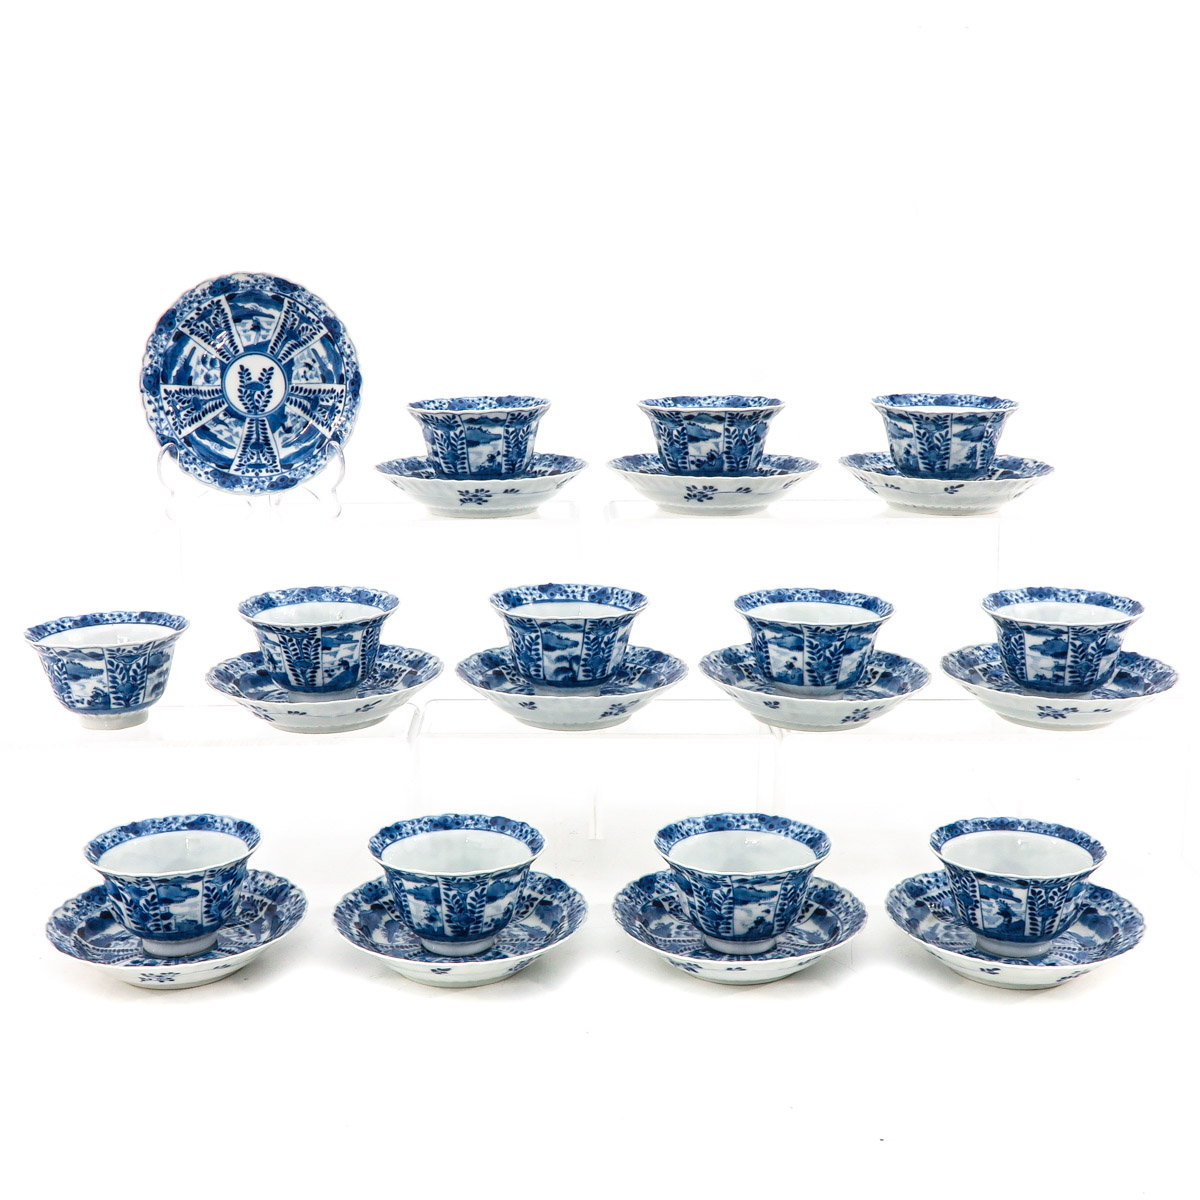 A Collection of 12 Cups and Saucers